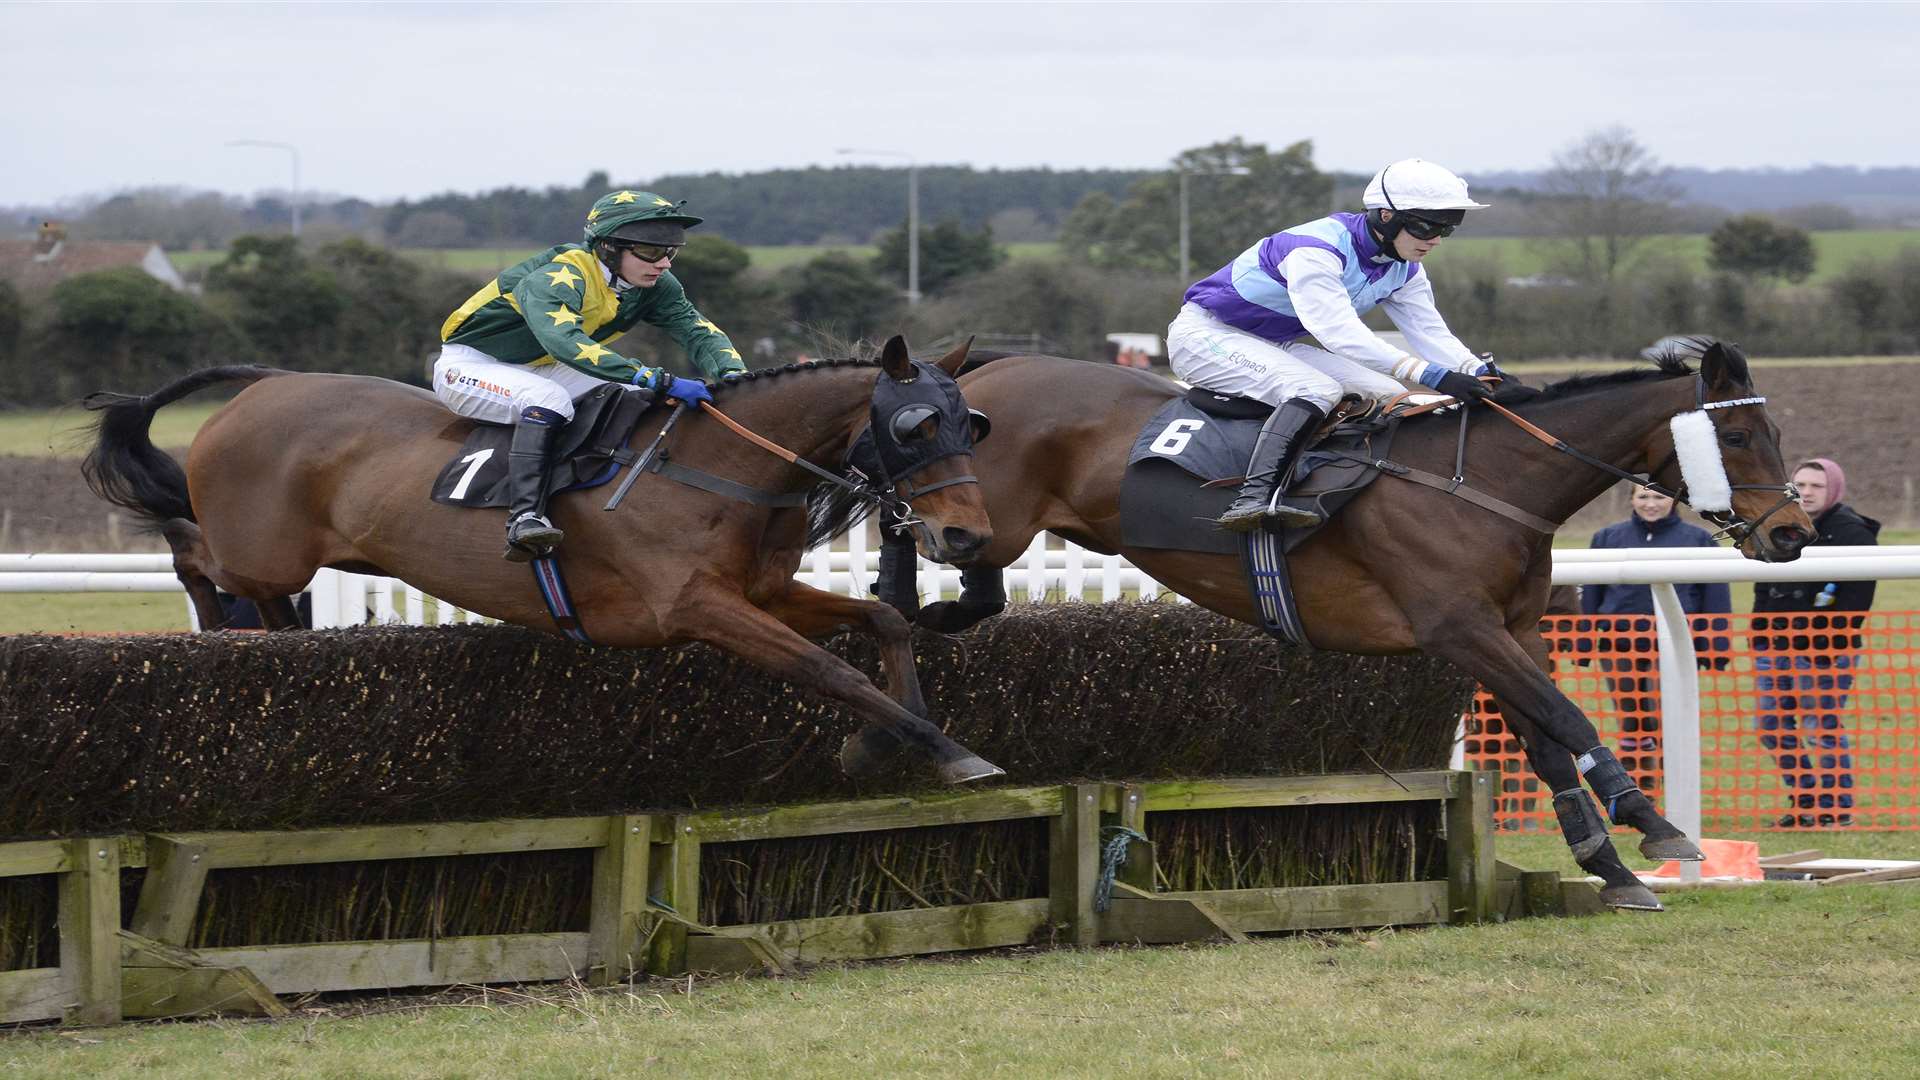 Point-to-point at Charing